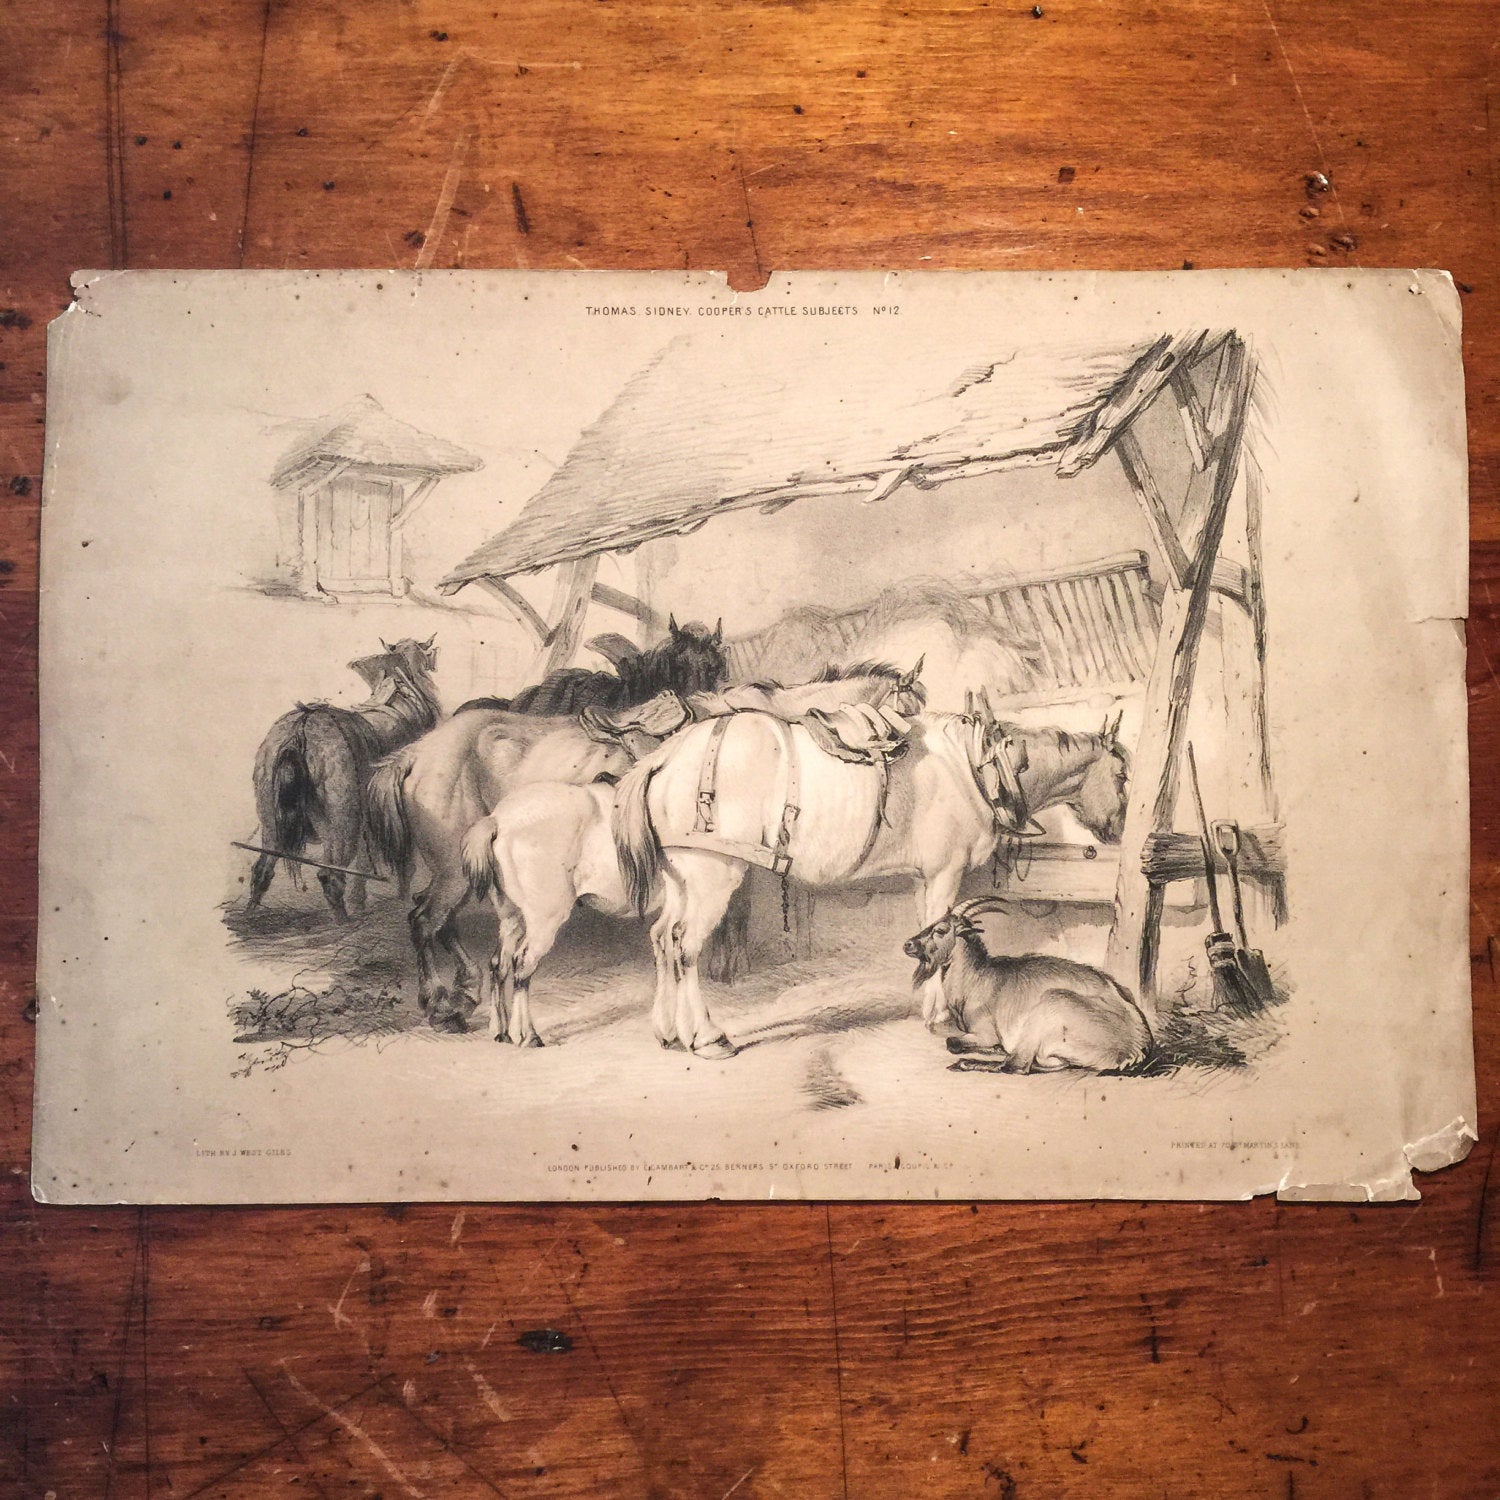 Thomas Sidney Cooper Lithographs (3) - Cattle Subjects - 1845 - J. West Giles - London - Rare - British Lithographs - British Prints